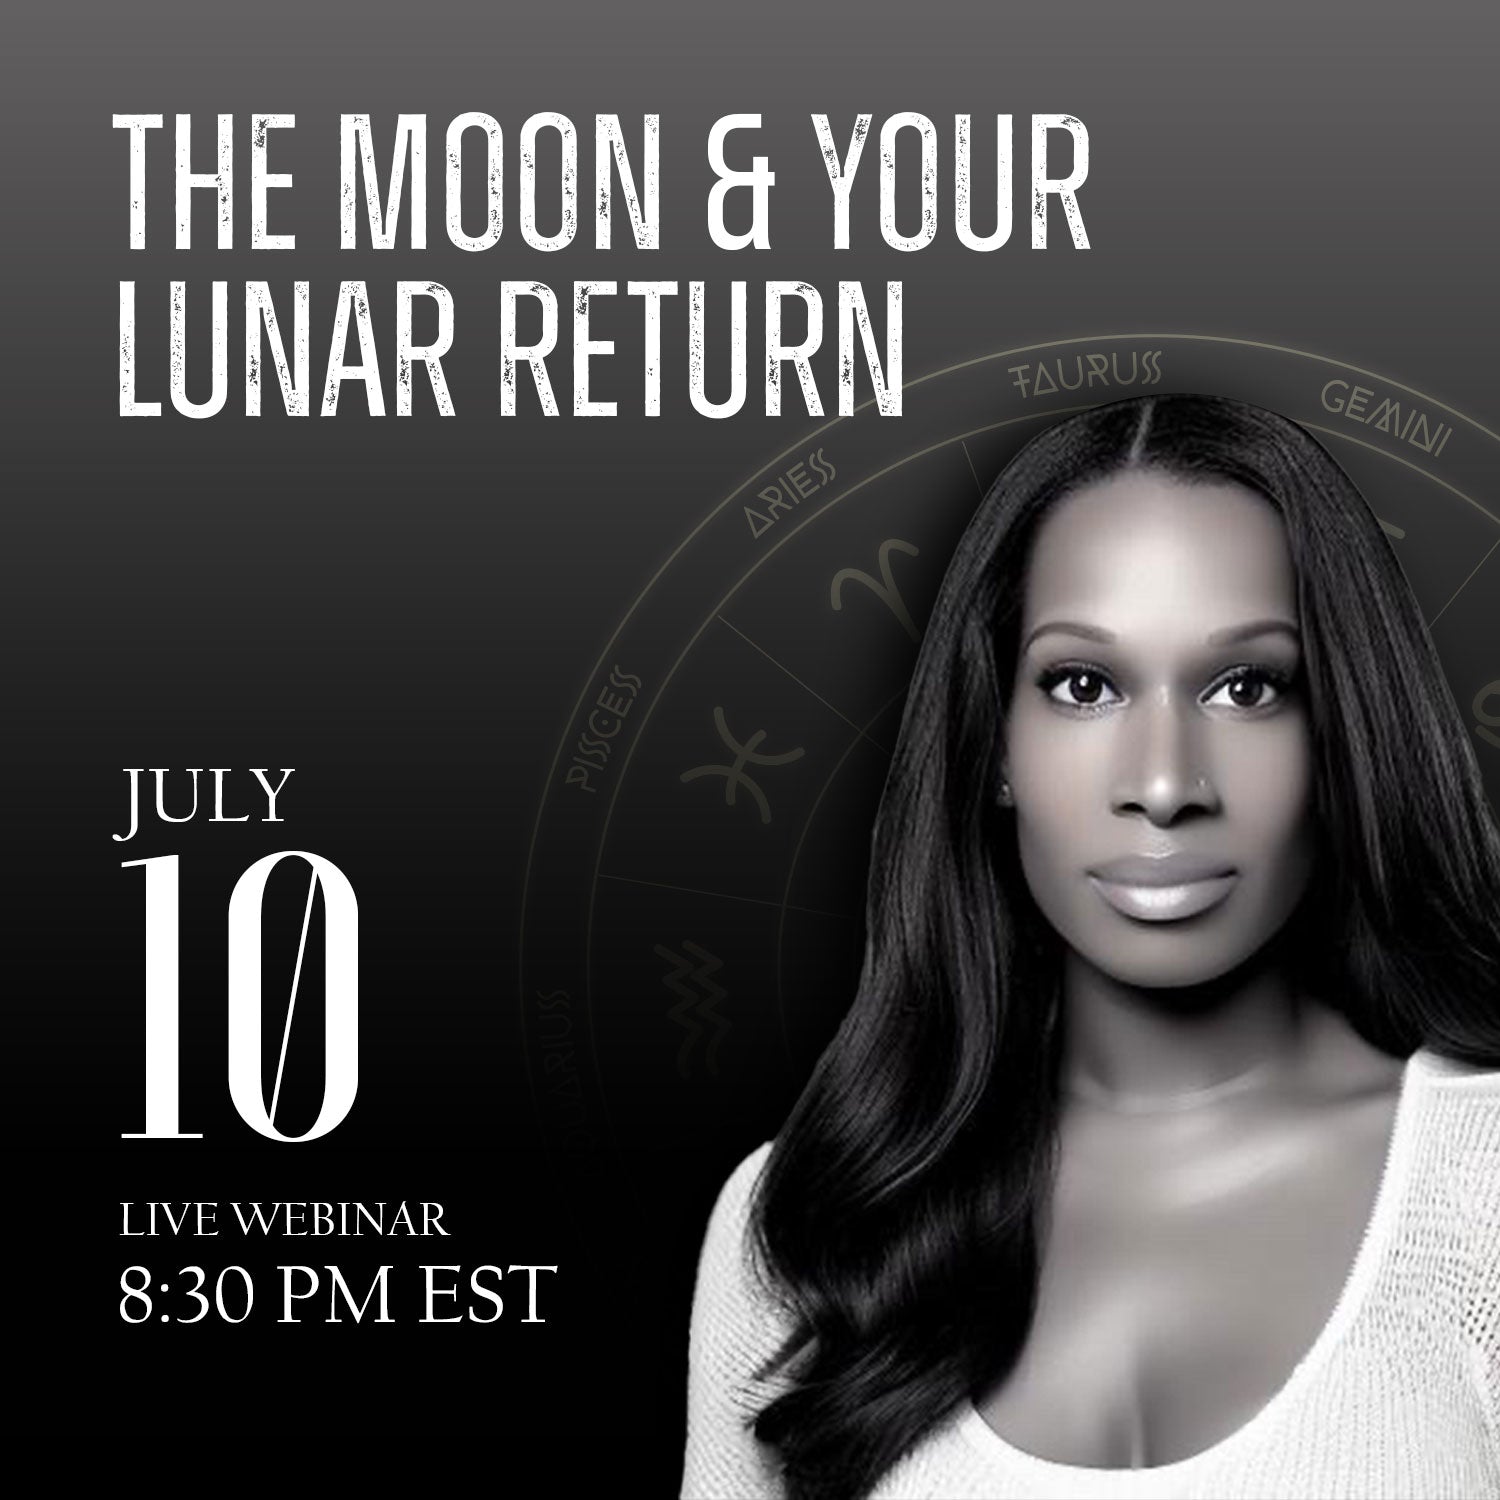 The Moon and Your Lunar Return - Live Webinar